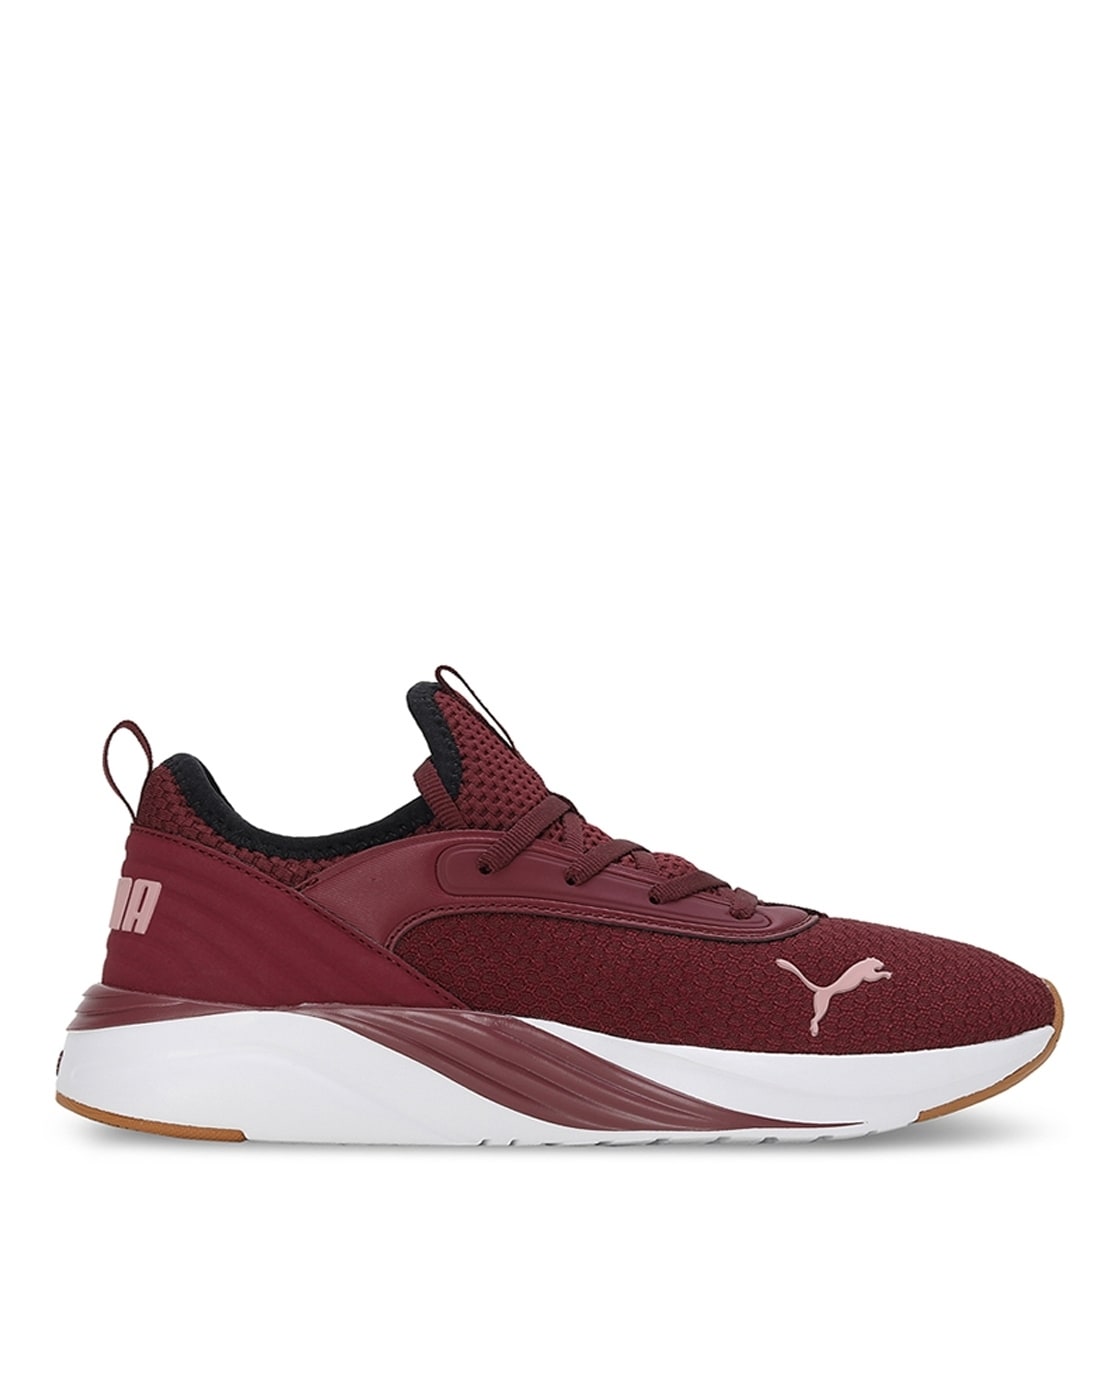 Puma Sneakers suede mayu Women 38258101 Leather 49€